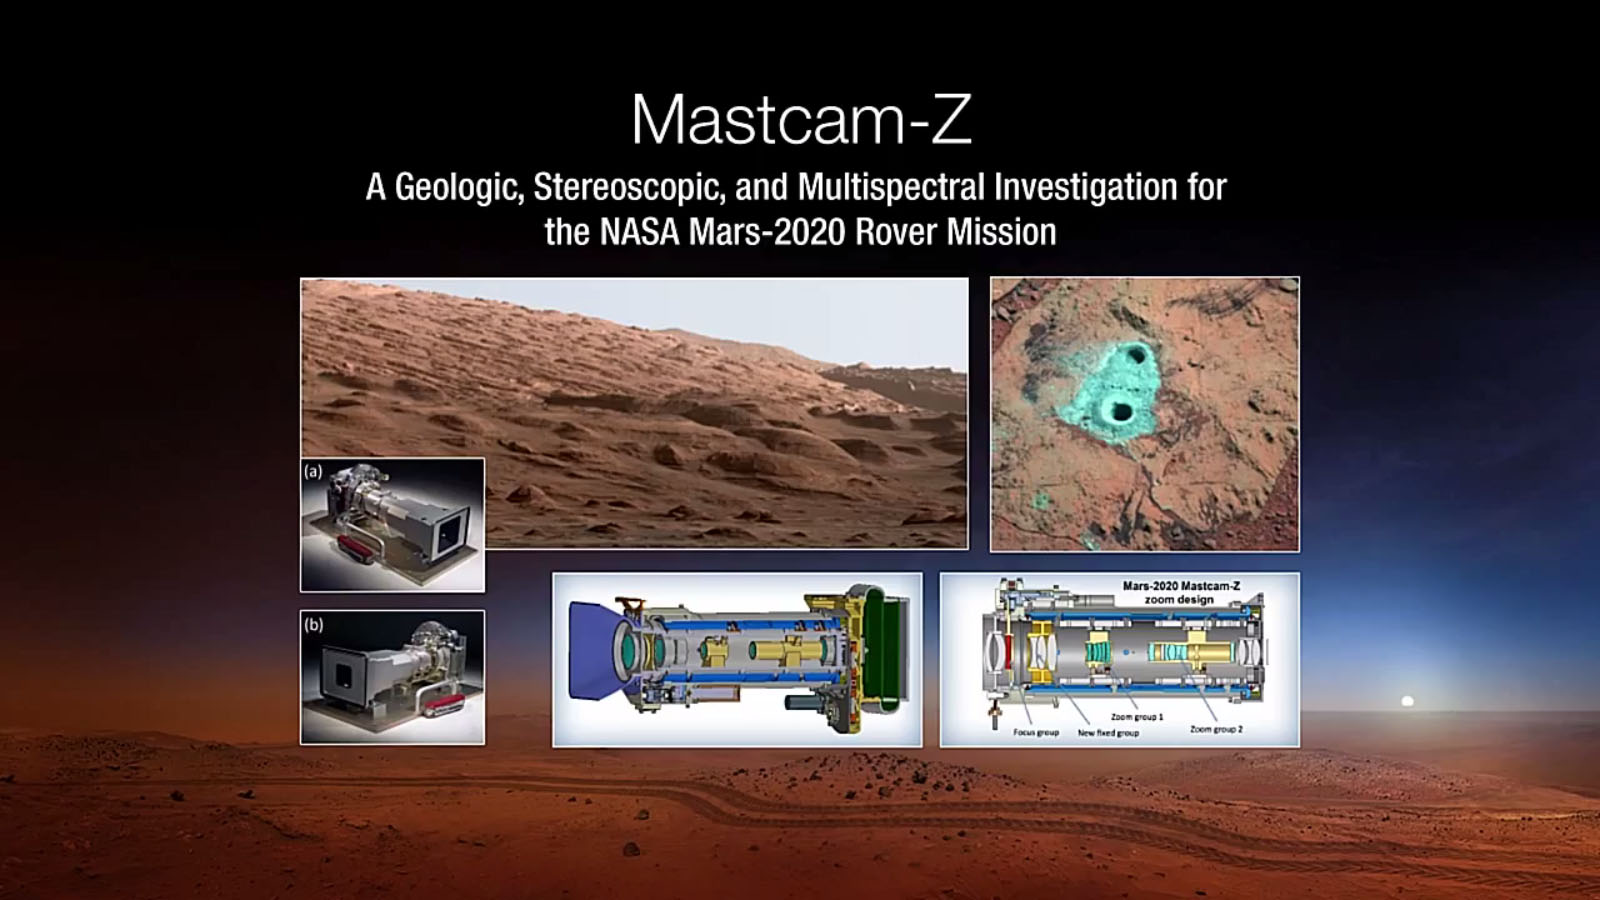 This illustration shows the location of Mastcam-Z, a powerful camera to ride on NASA's Mars 2020 rover to observe the Martian surface like never before. Mastcam-Z is an an advanced camera system with panoramic and stereoscopic imaging capability with a zoom capability.